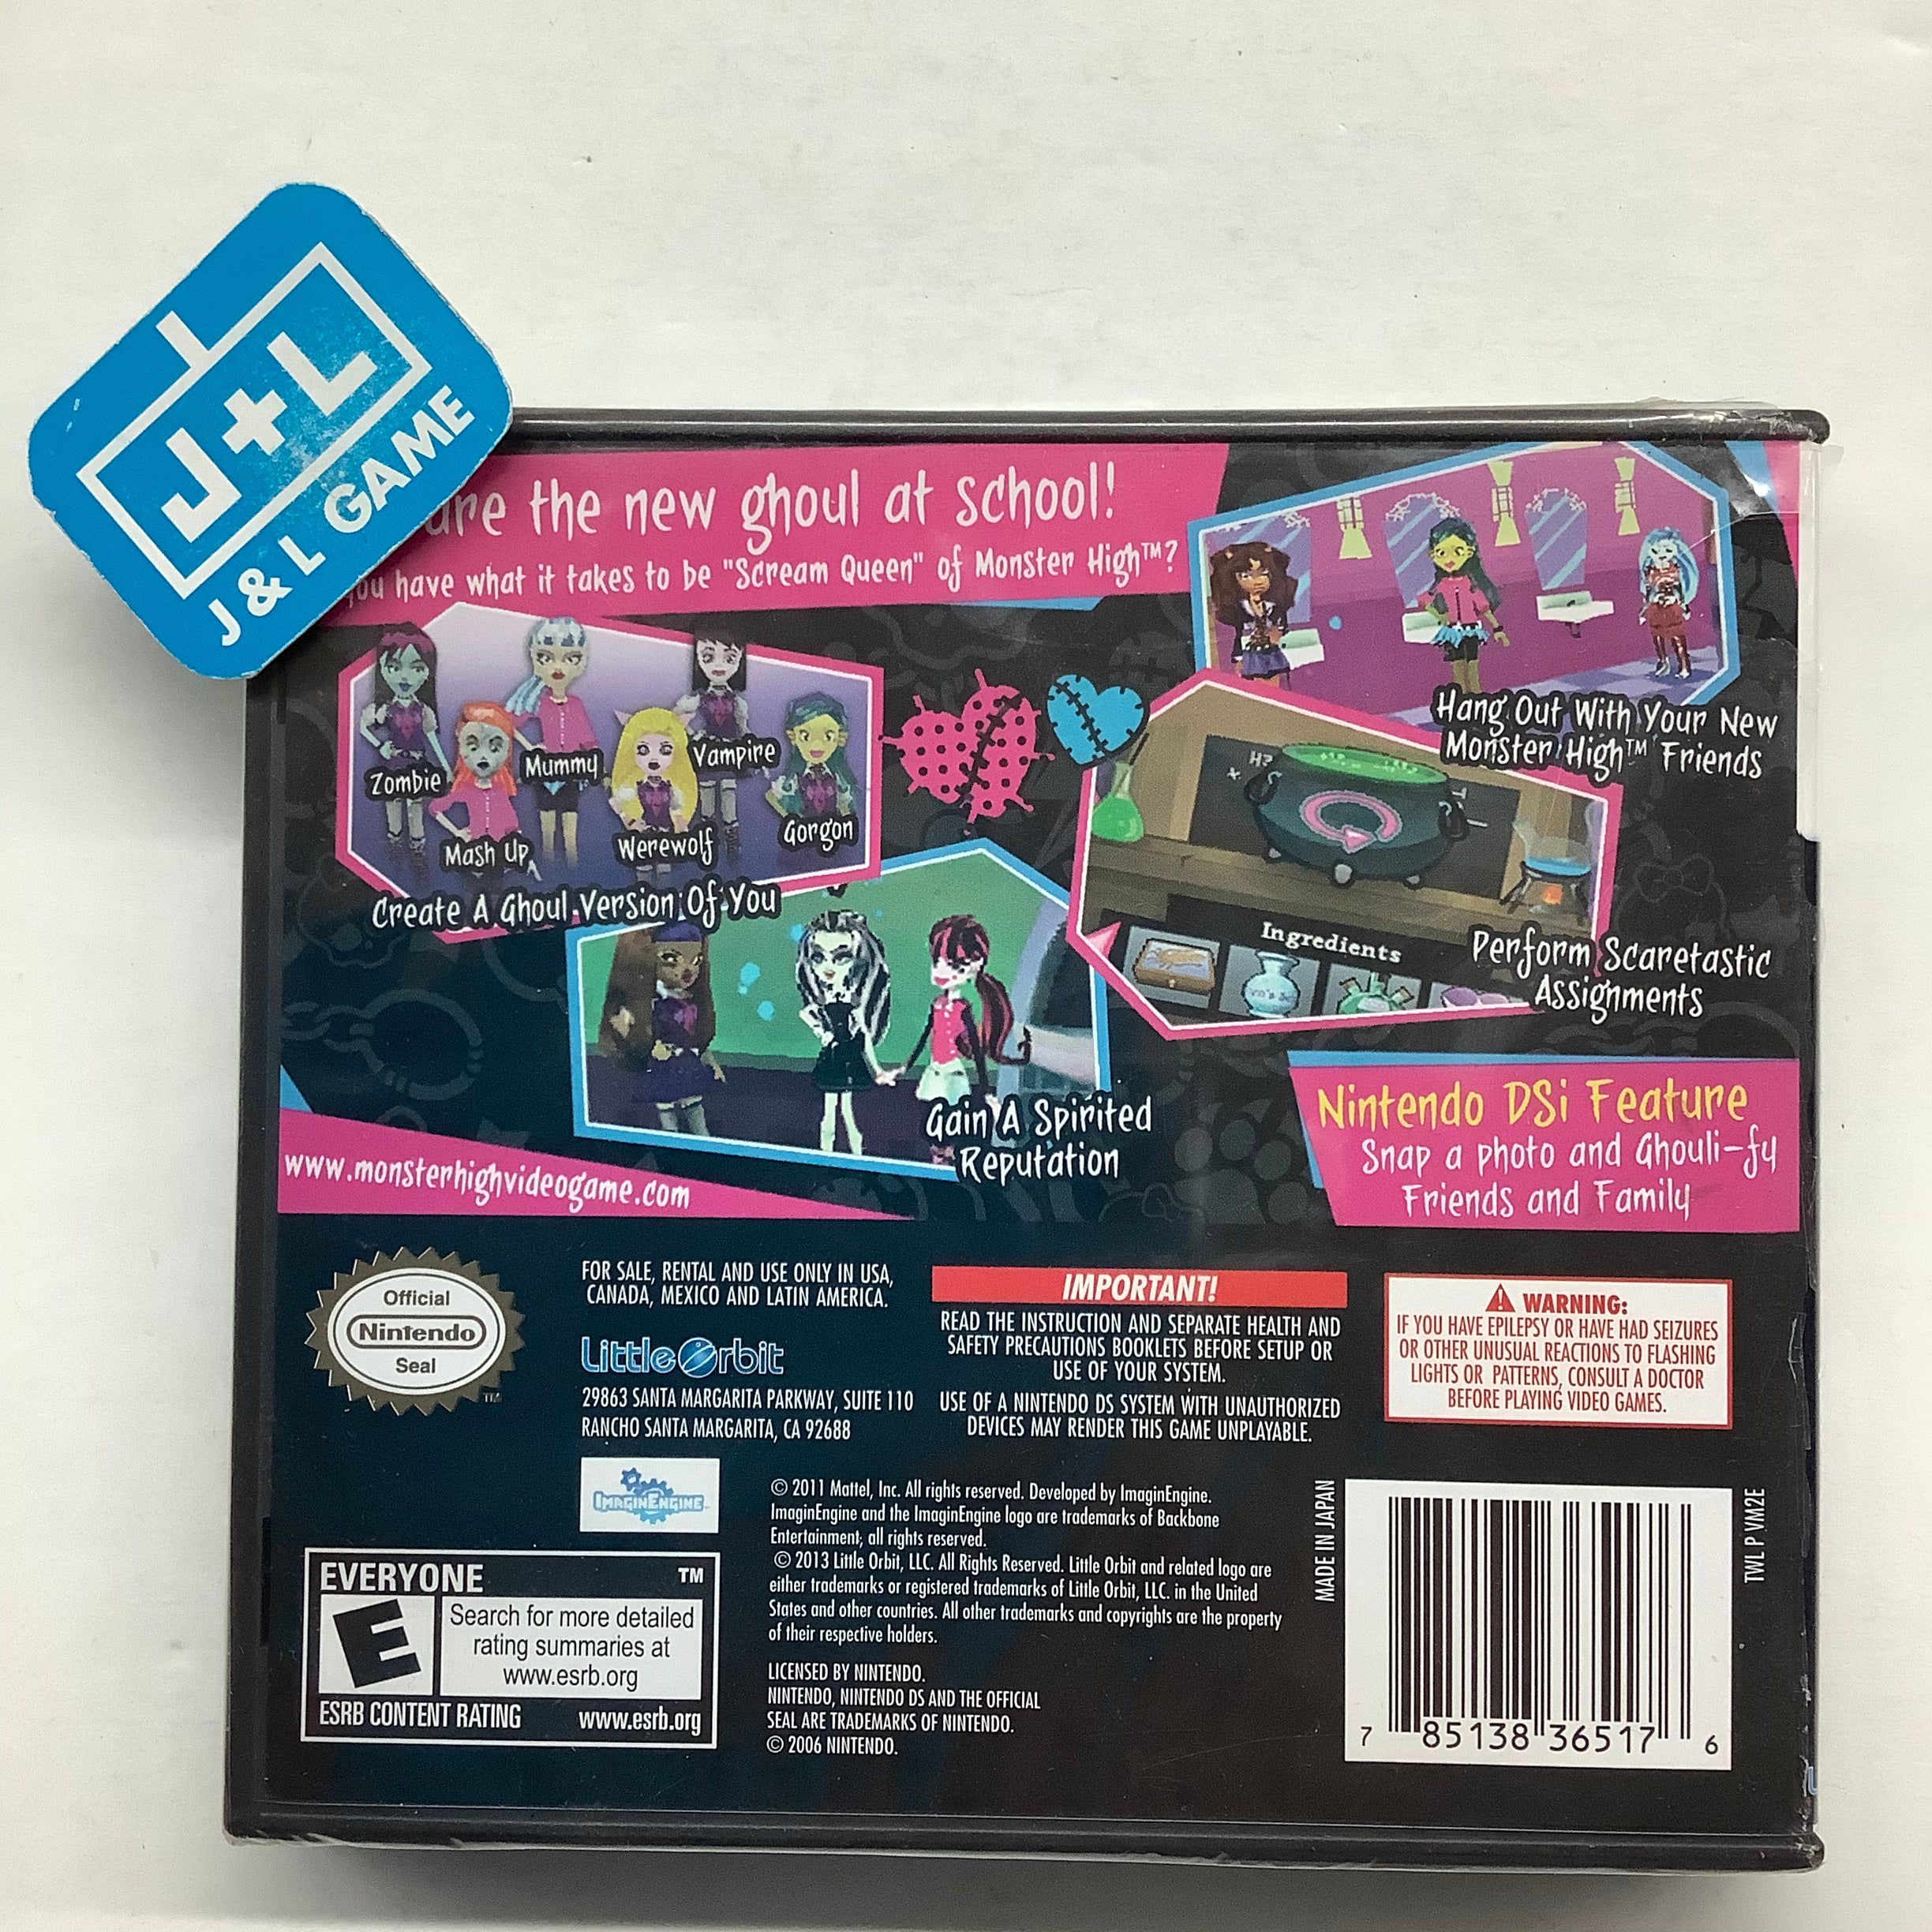 Monster High: Ghoul Spirit - (NDS) Nintendo DS Video Games THQ   